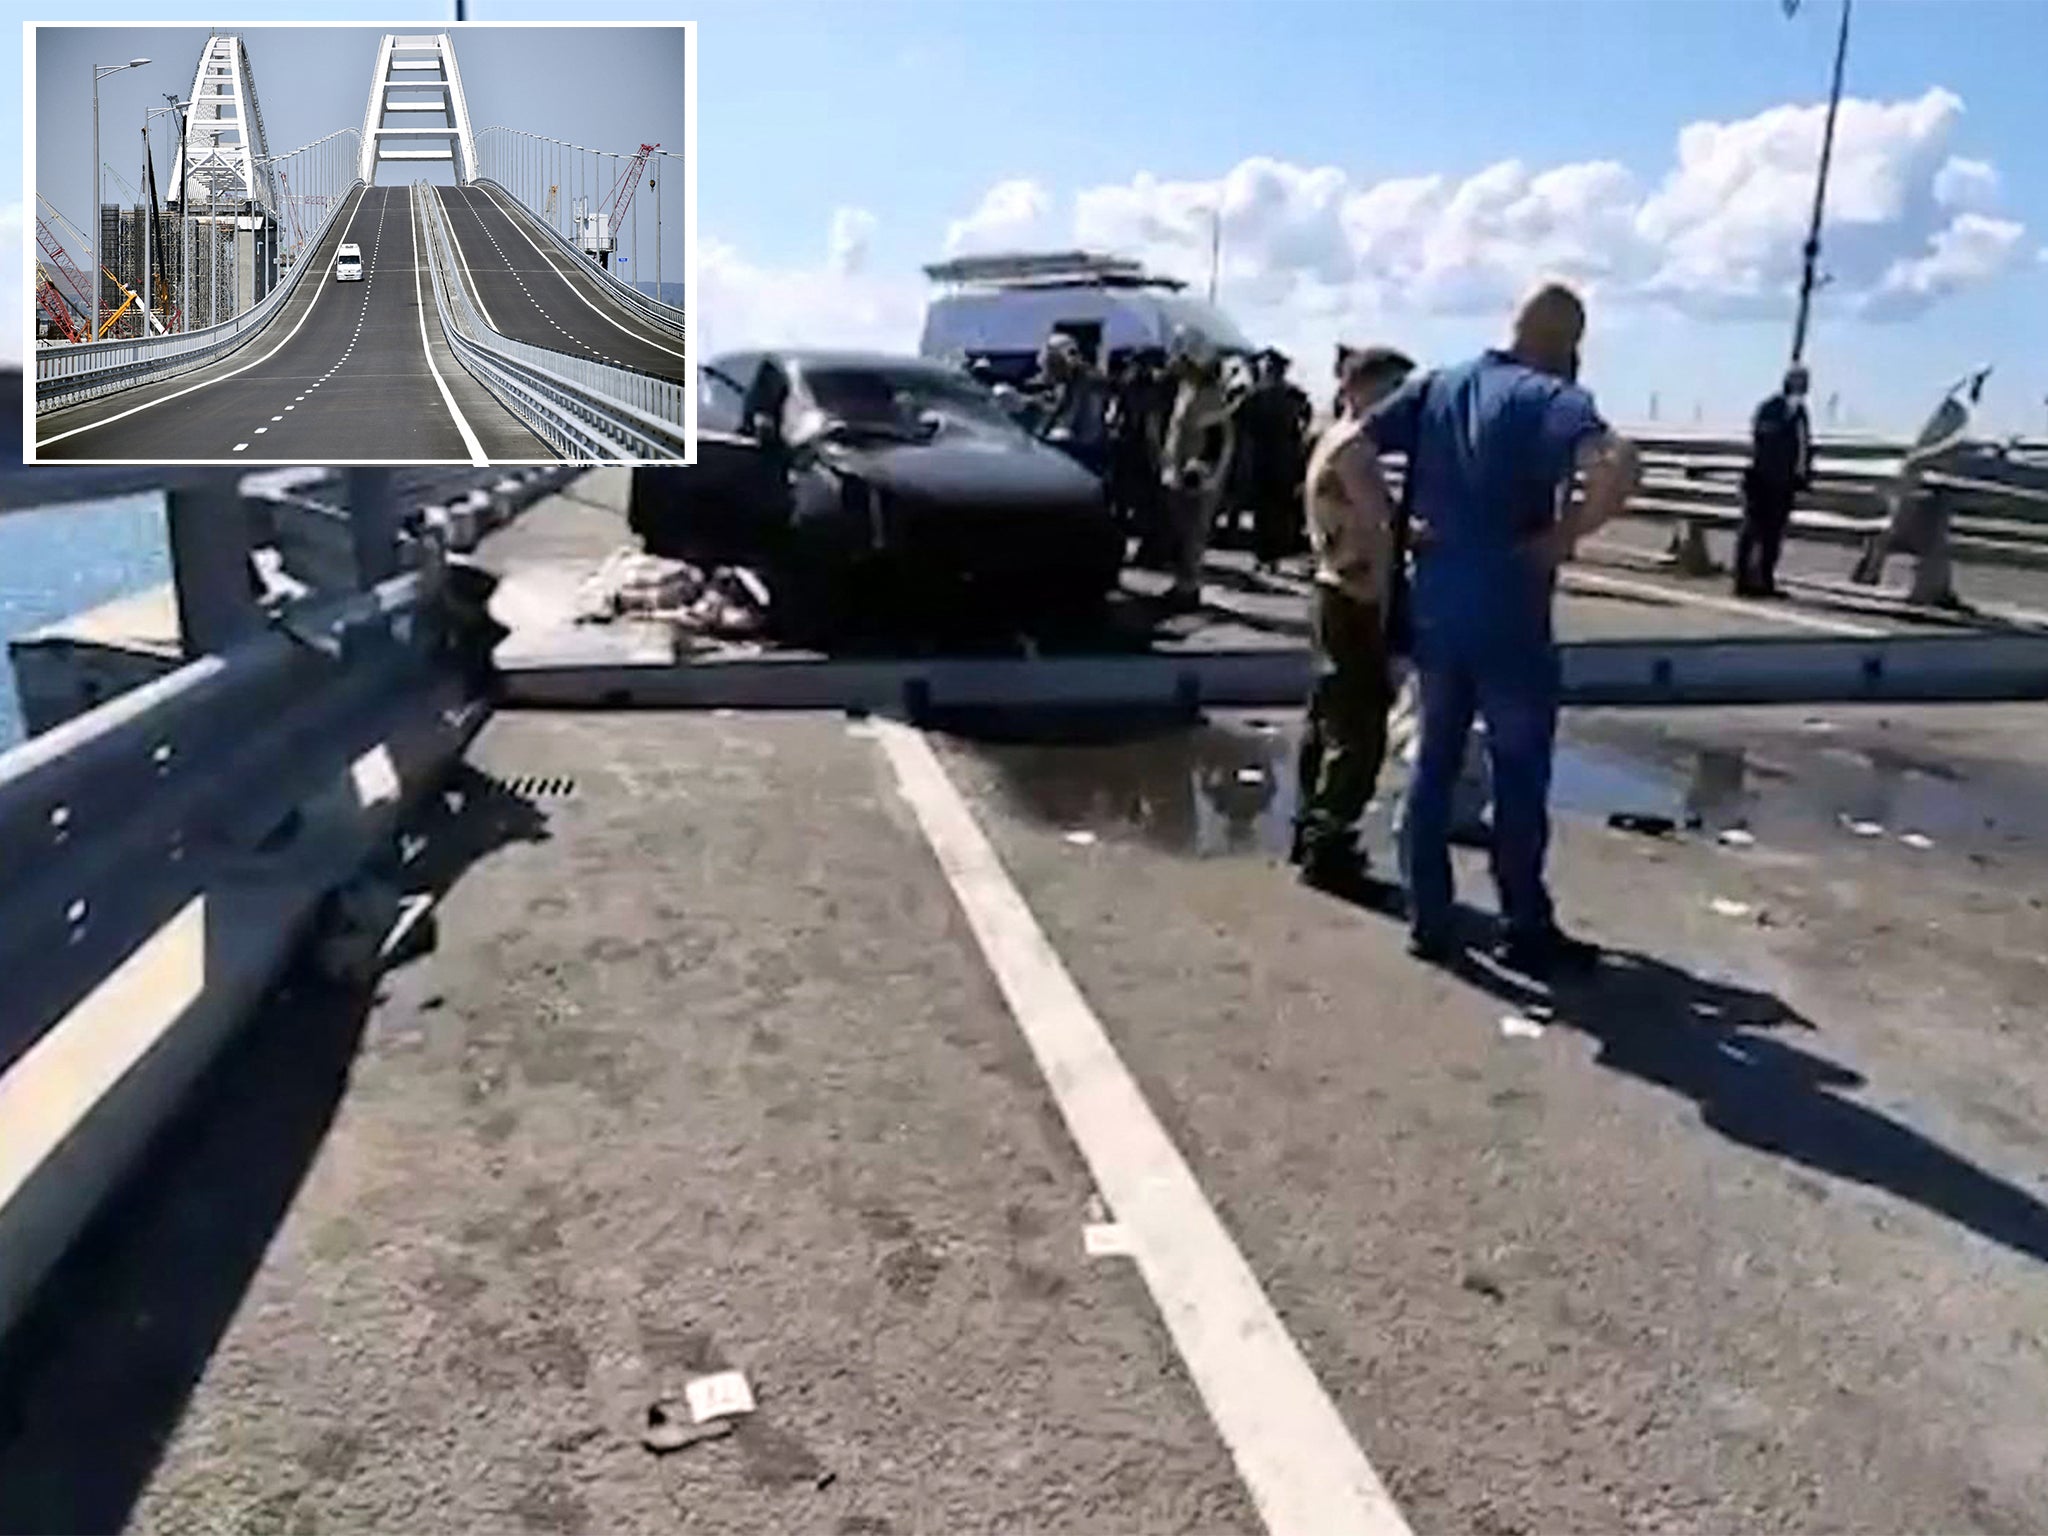 Russian officials on the Kerch Bridge yesterday